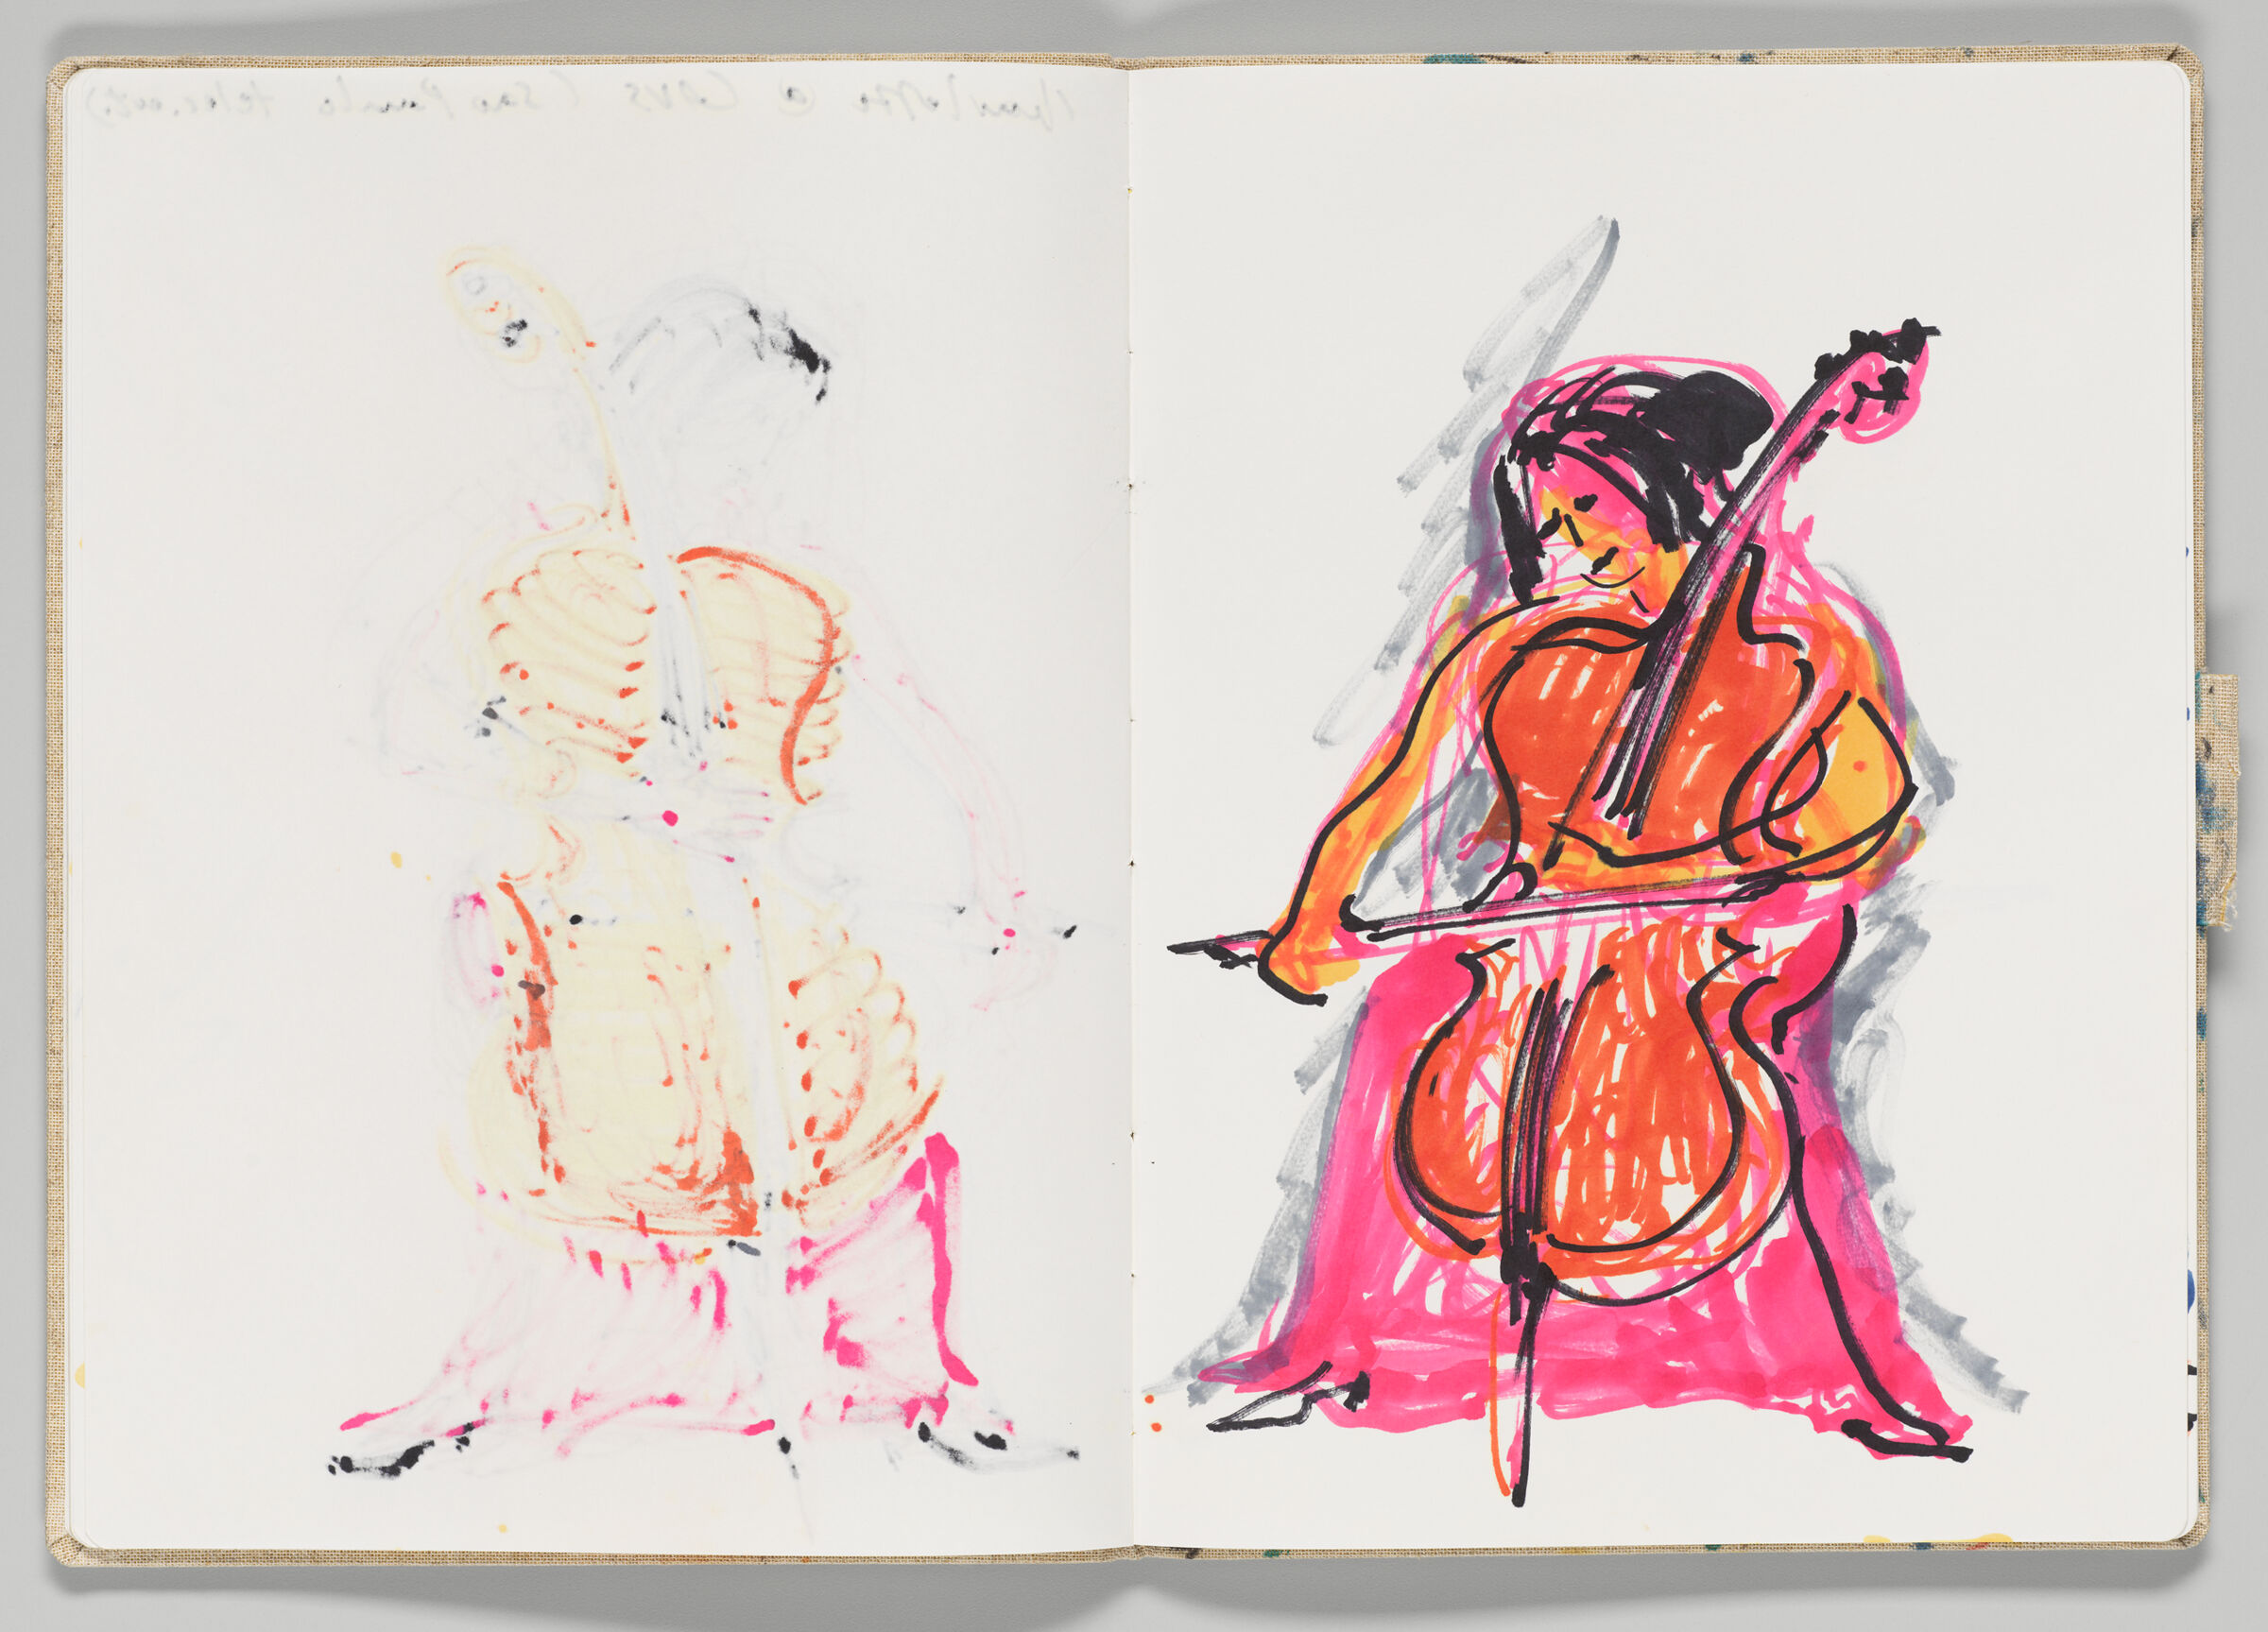 Untitled (Bleed-Through Of Previous Page, Left Page); Untitled (Charlotte Moorman Playing Cello, Right Page)